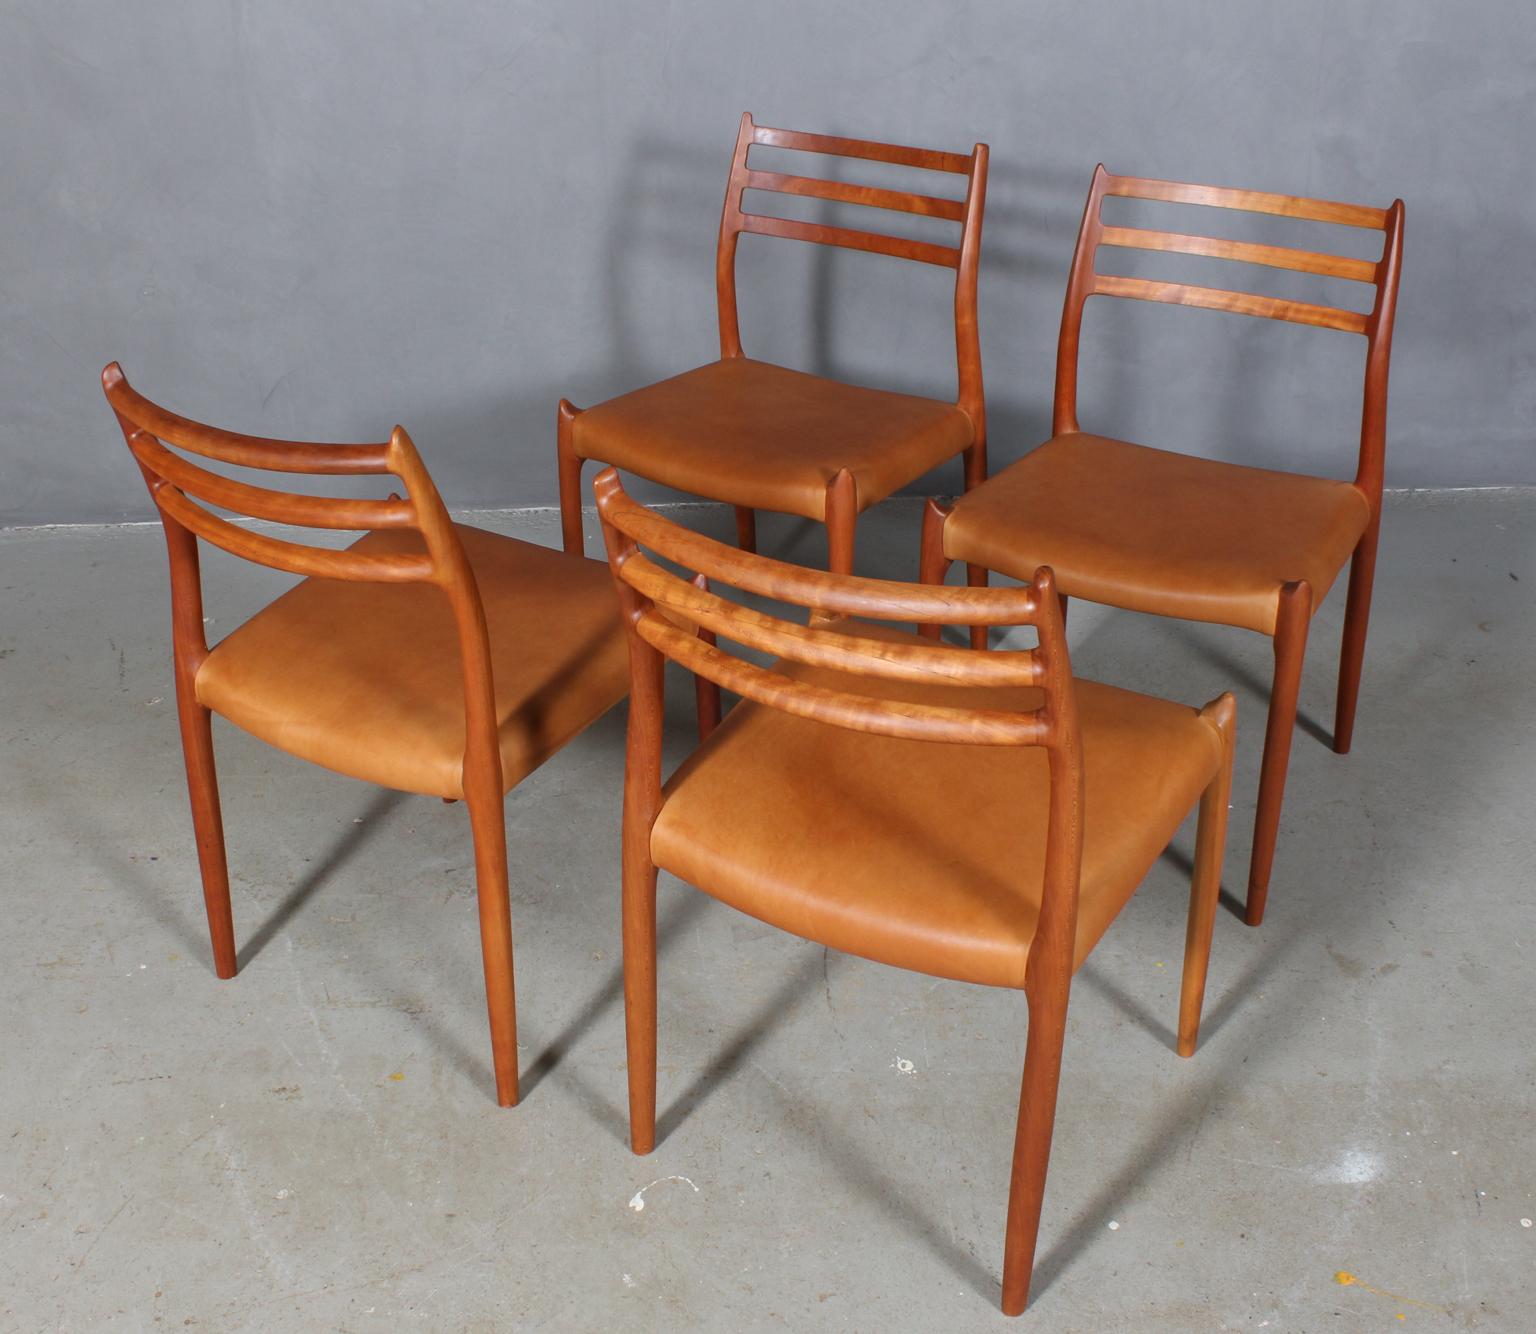 Set of four N. O. Møller dining chairs with frame of solid cherry.

Seats new upholstered with vintage tan aniline leather

Model 78, made by J. L. Møller, Denmark, 1960s.